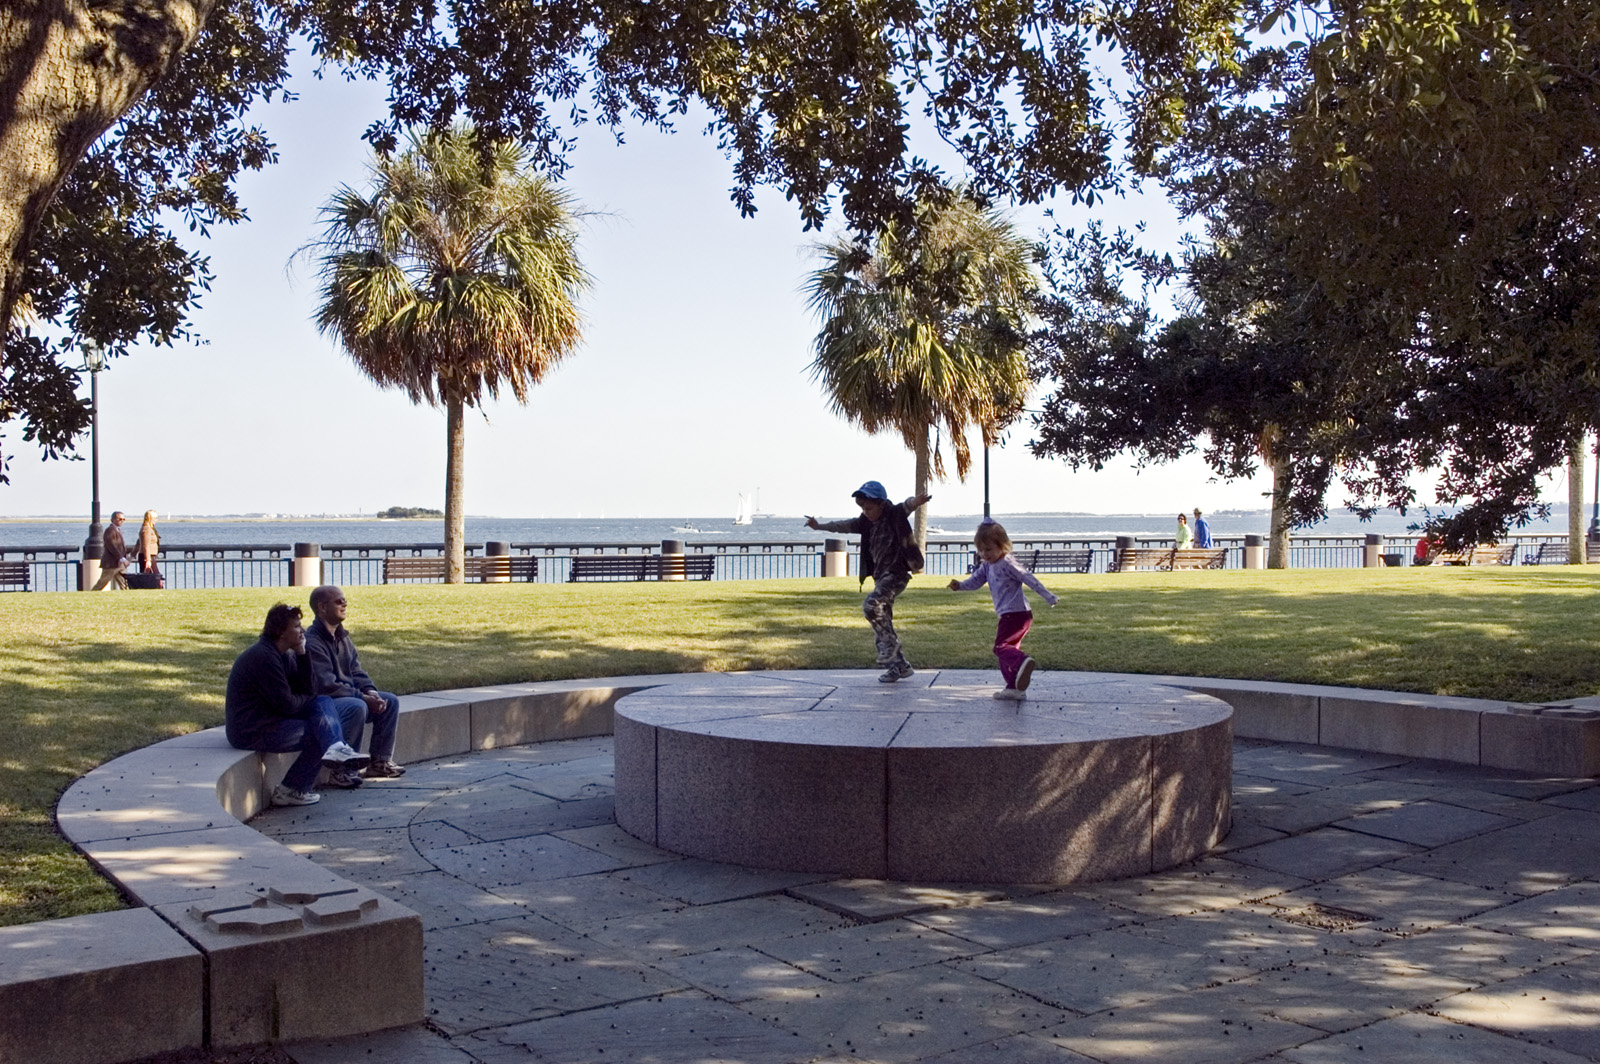 Photo of children jumping on stone ledge in park